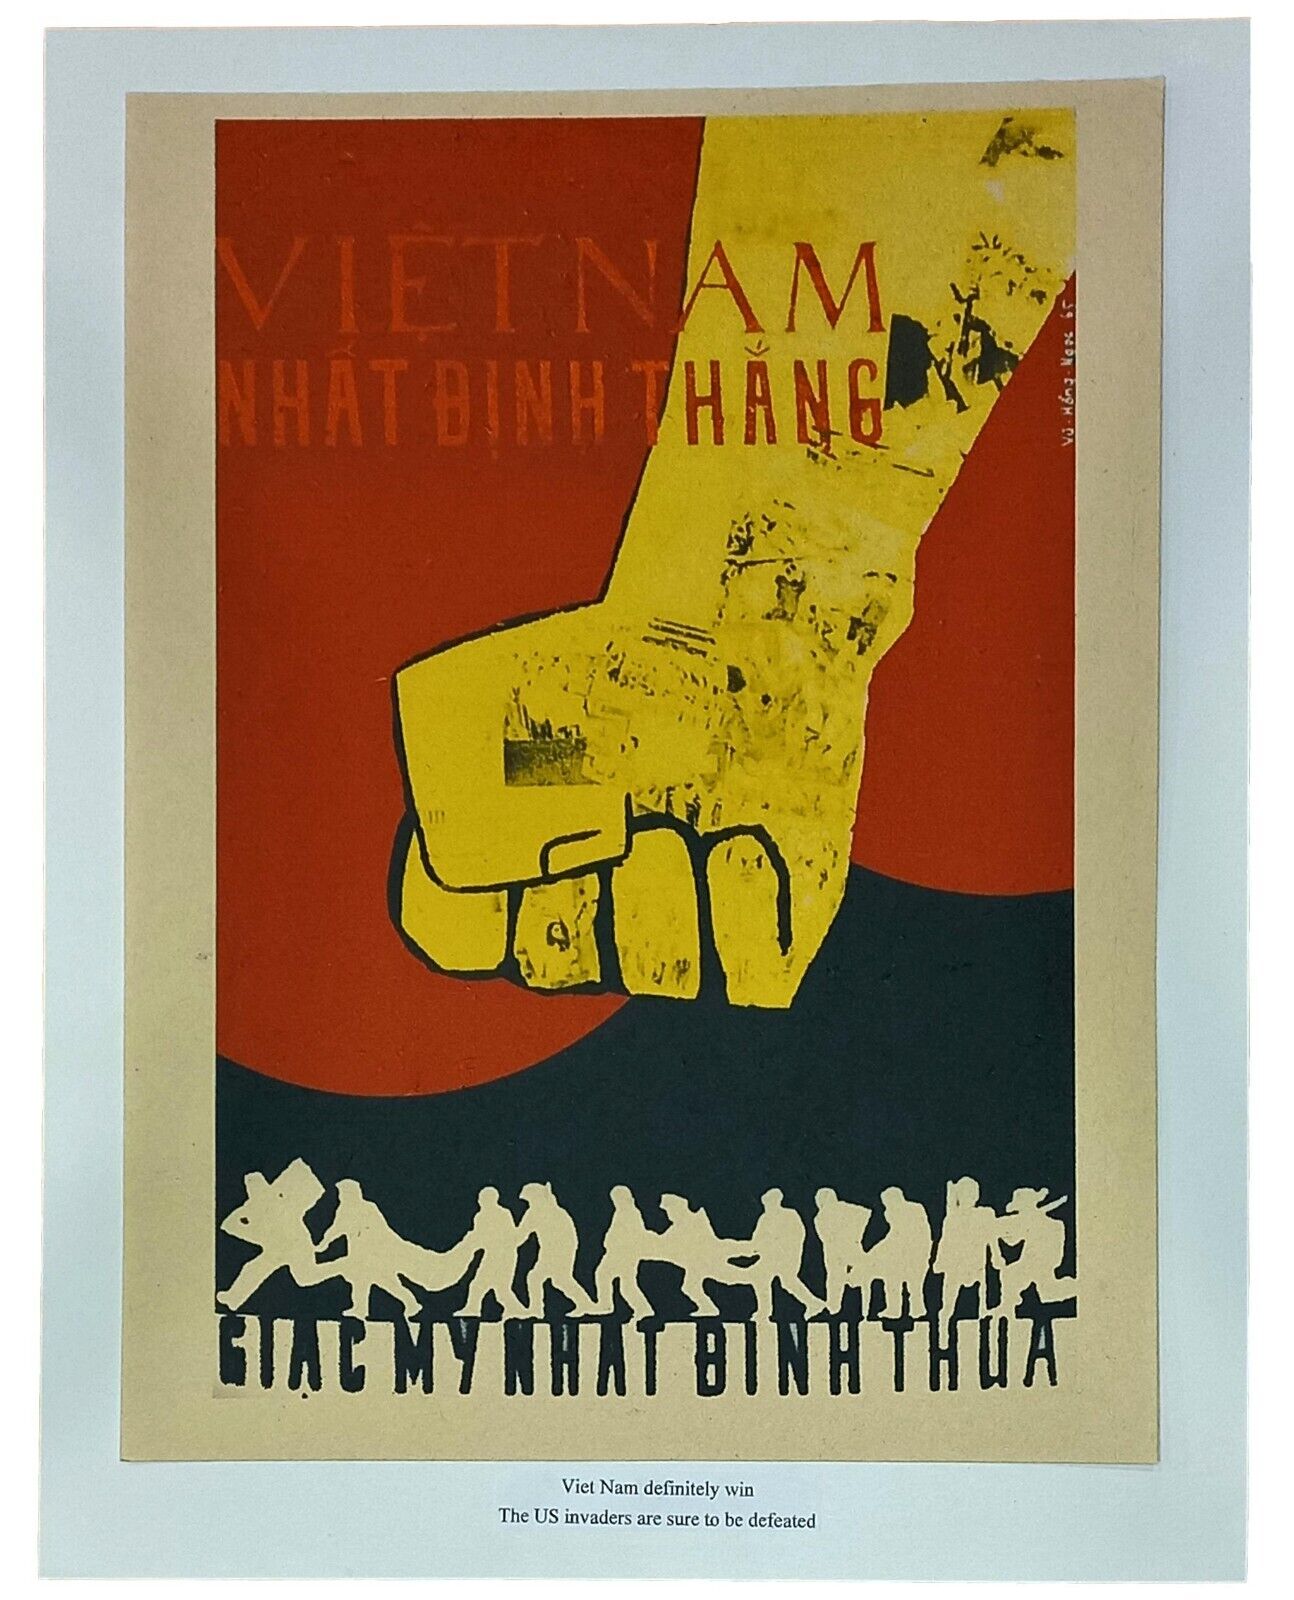 Vintage Vietnam War Poster We Will Definitely Win US Invaders Are Defeated 12x16